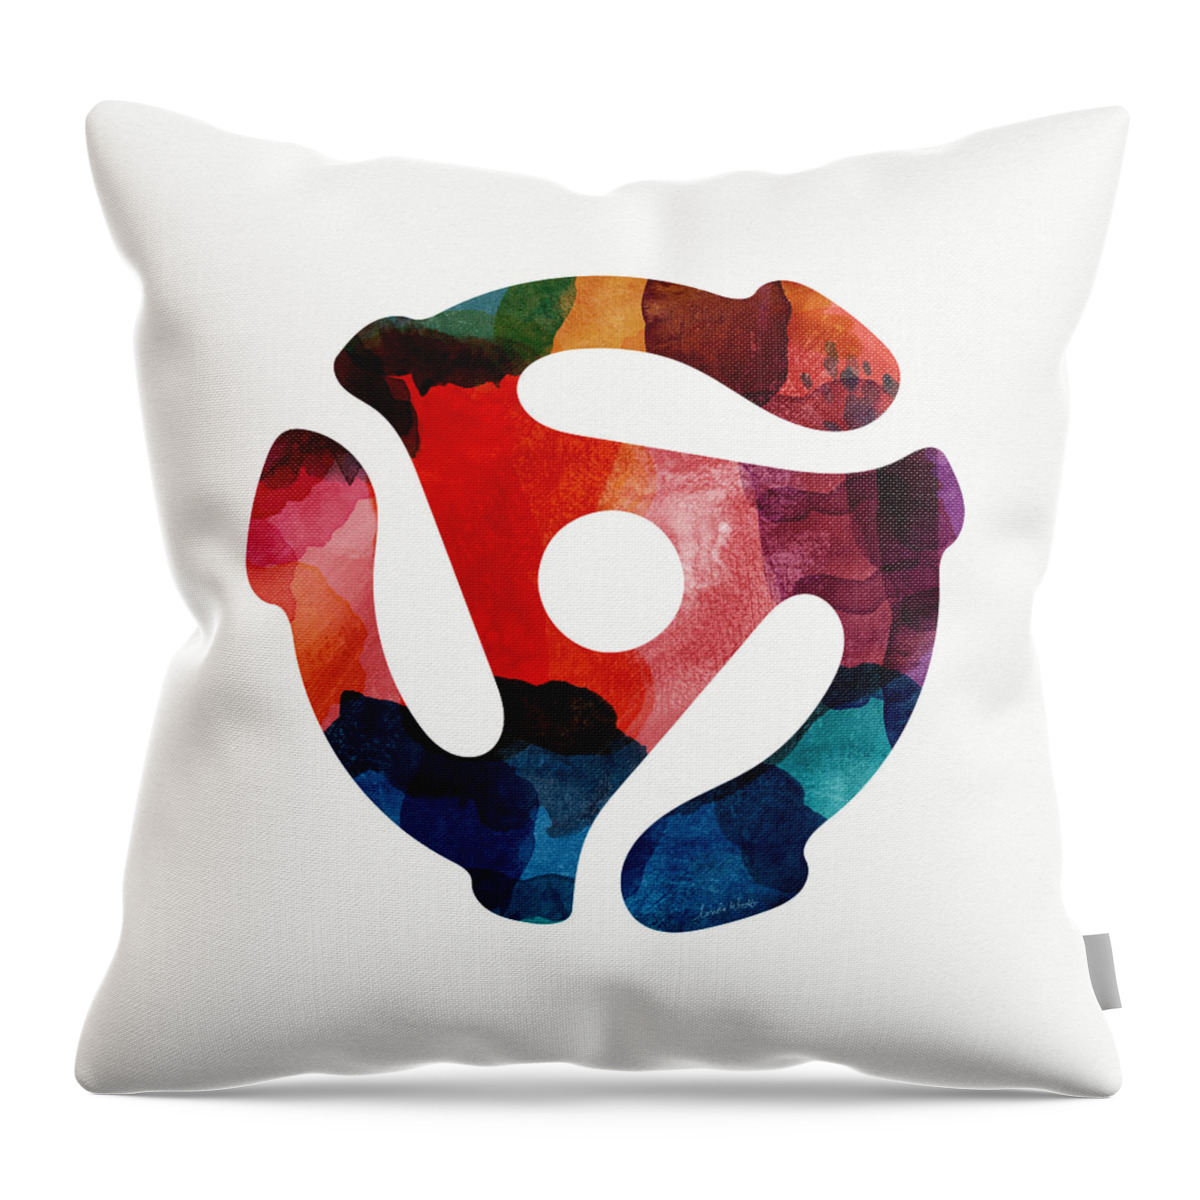 Music Throw Pillow featuring the painting Spinning 45- Art by Linda Woods by Linda Woods